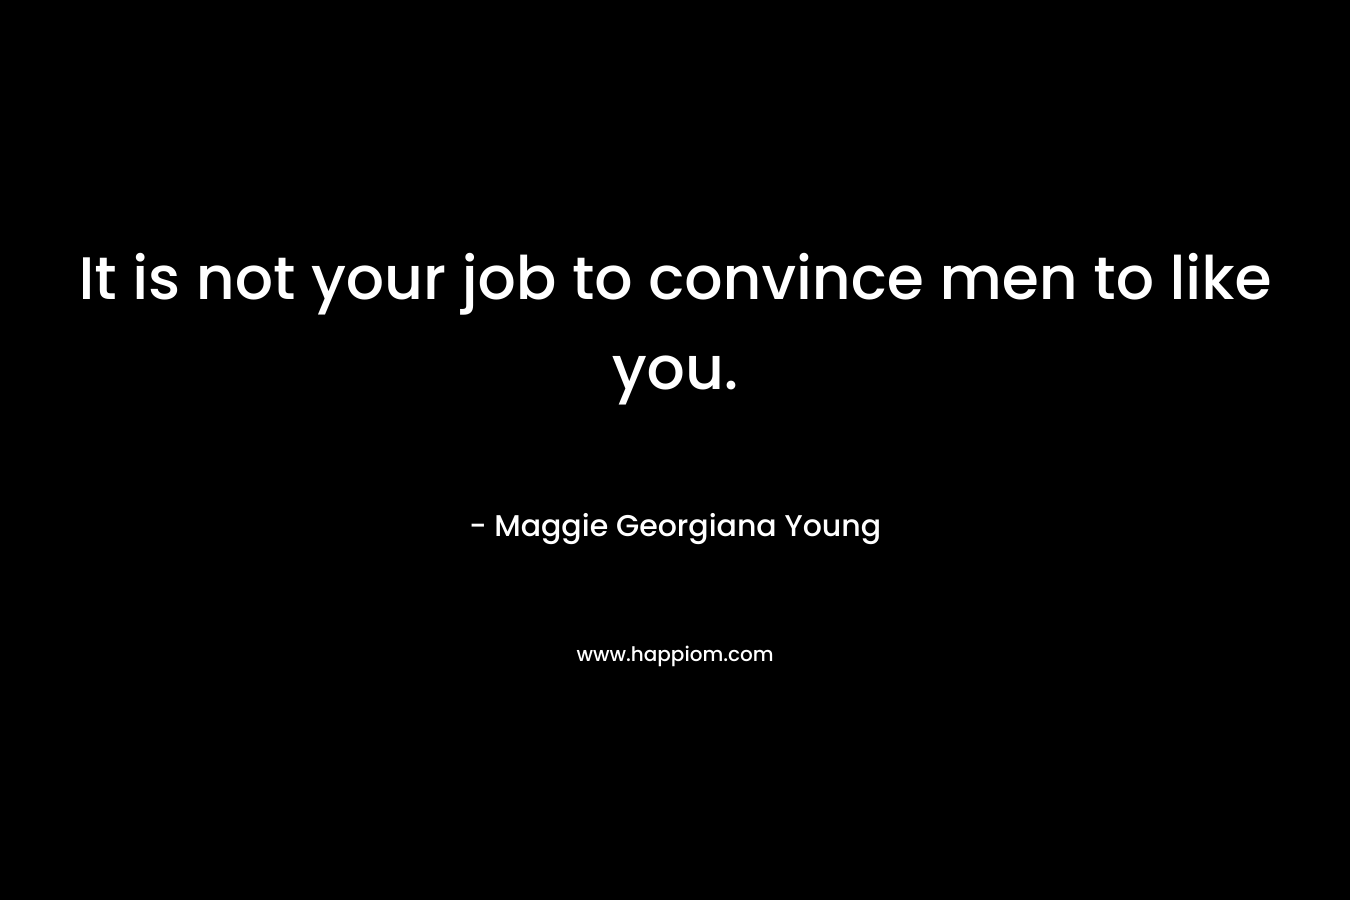 It is not your job to convince men to like you. – Maggie Georgiana Young